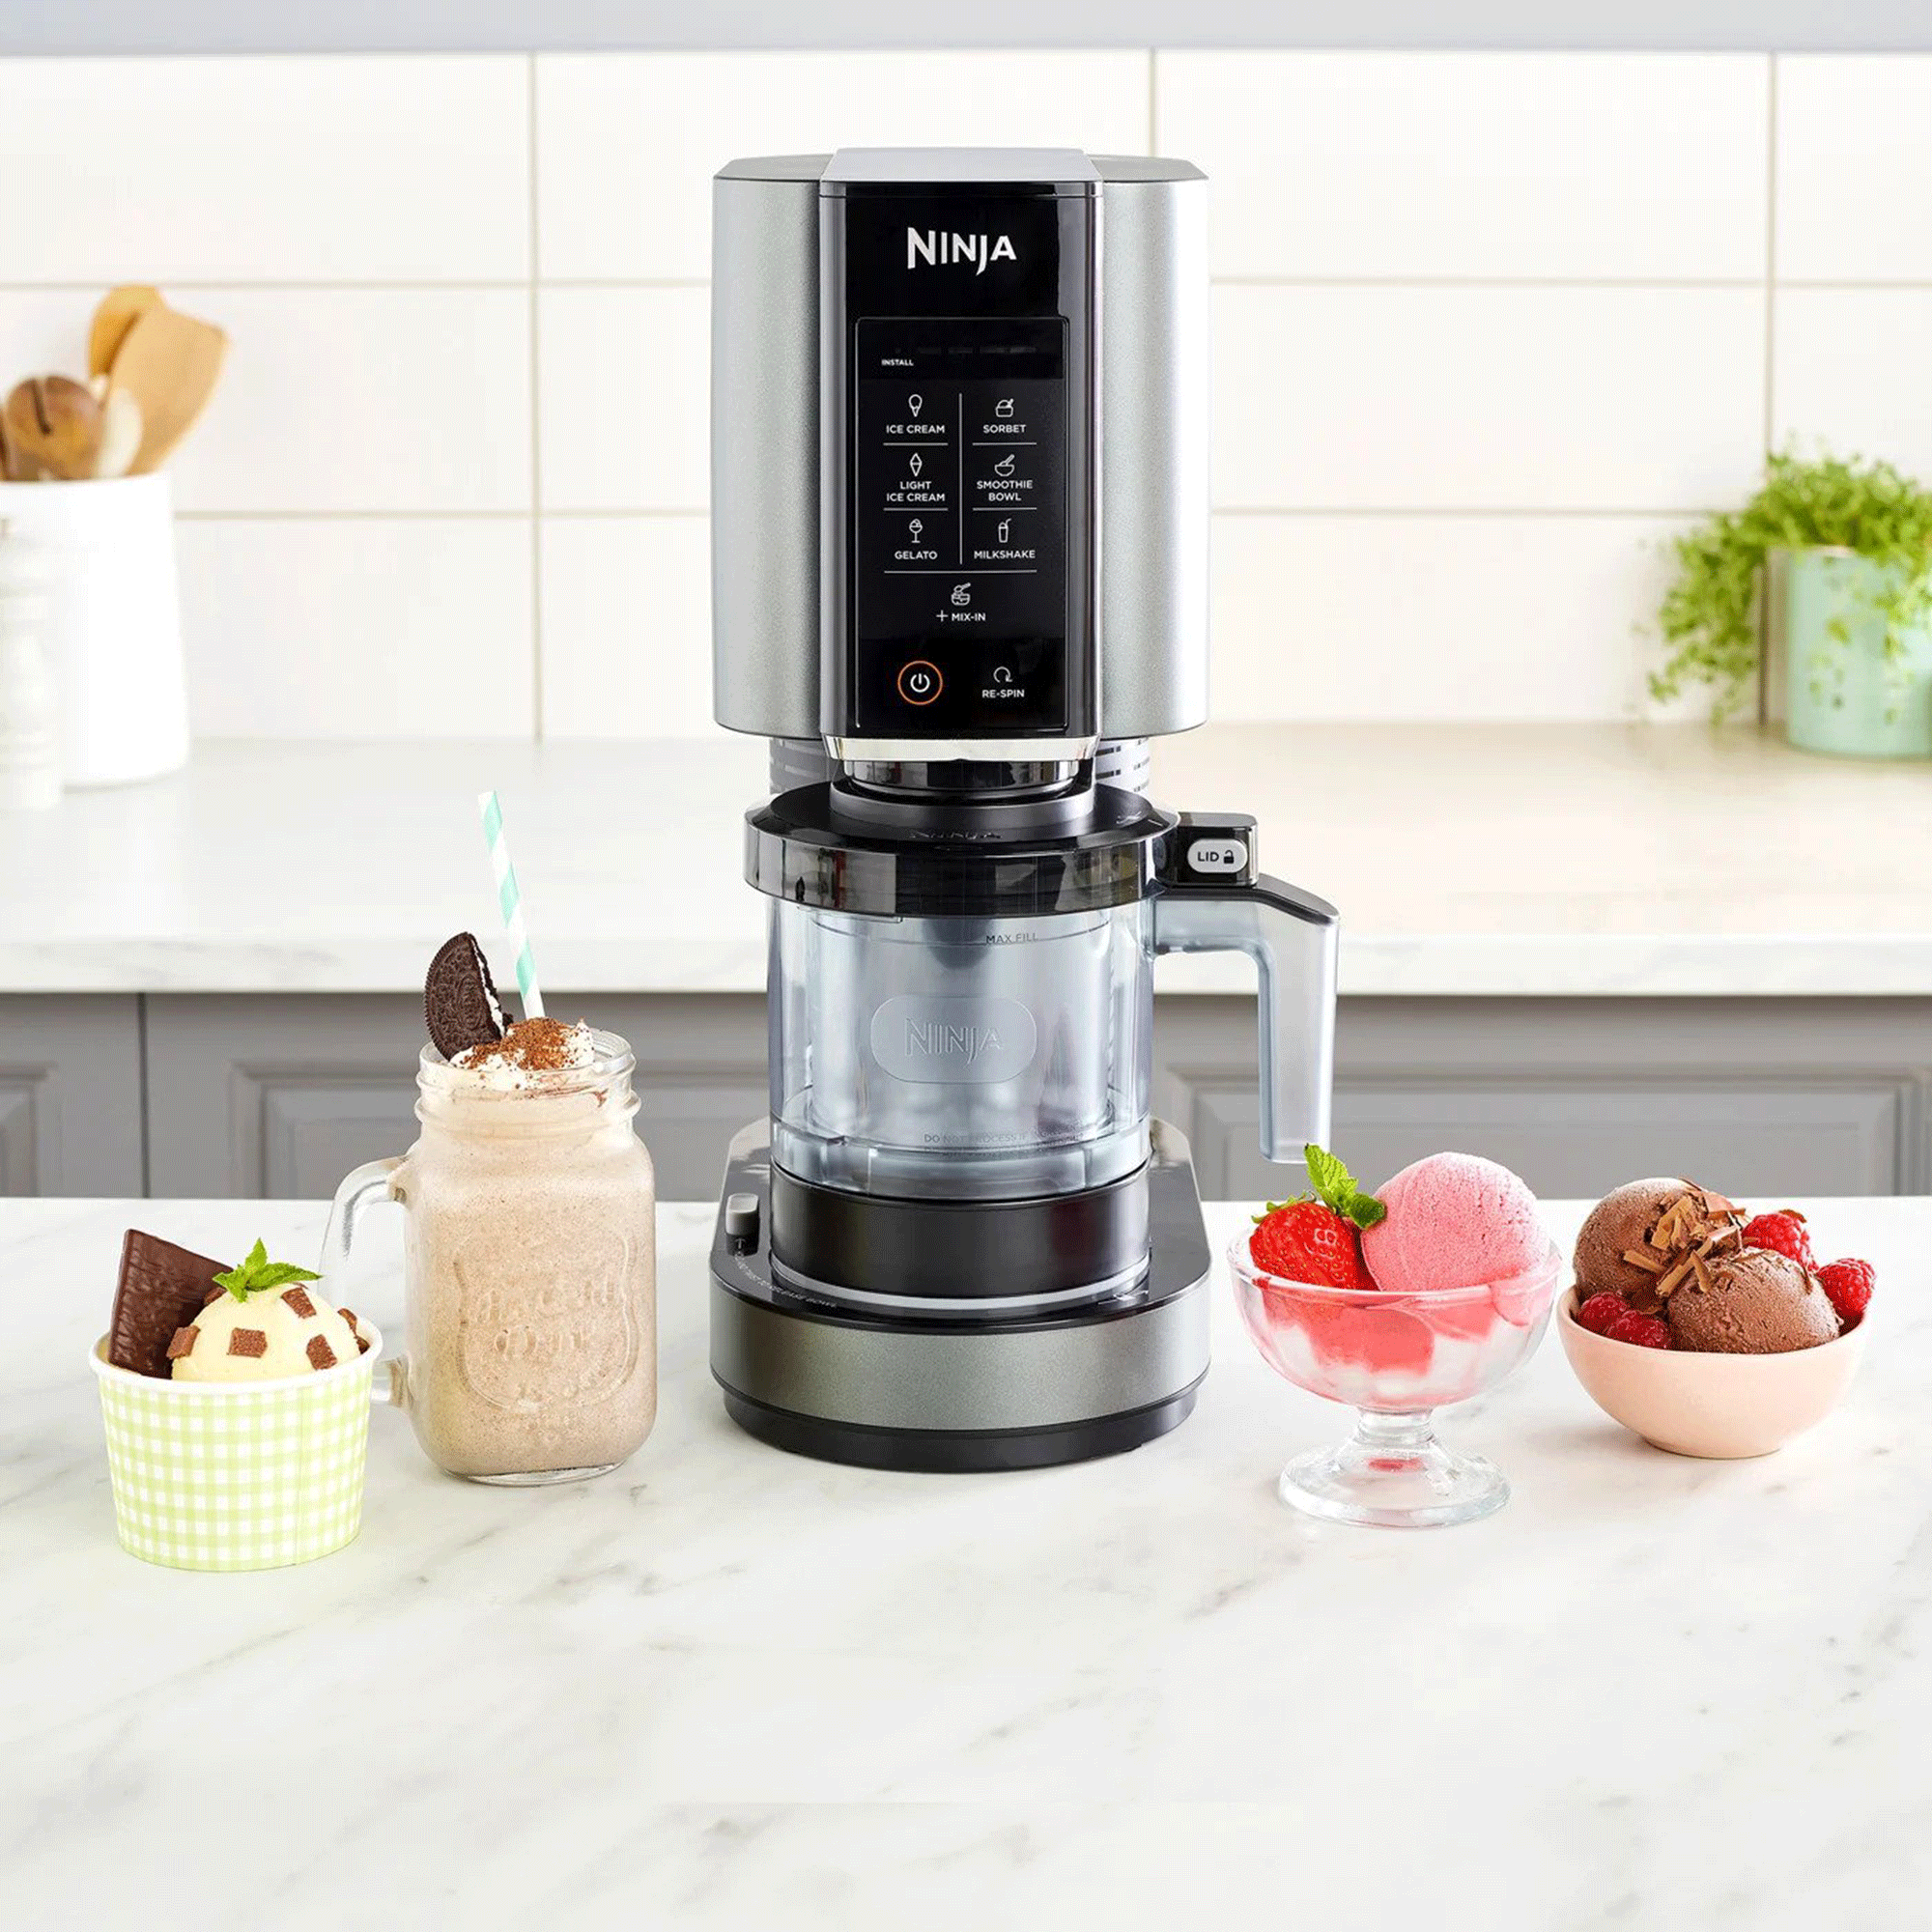 I tried the sellout Ninja Creami ice cream maker - and I can't